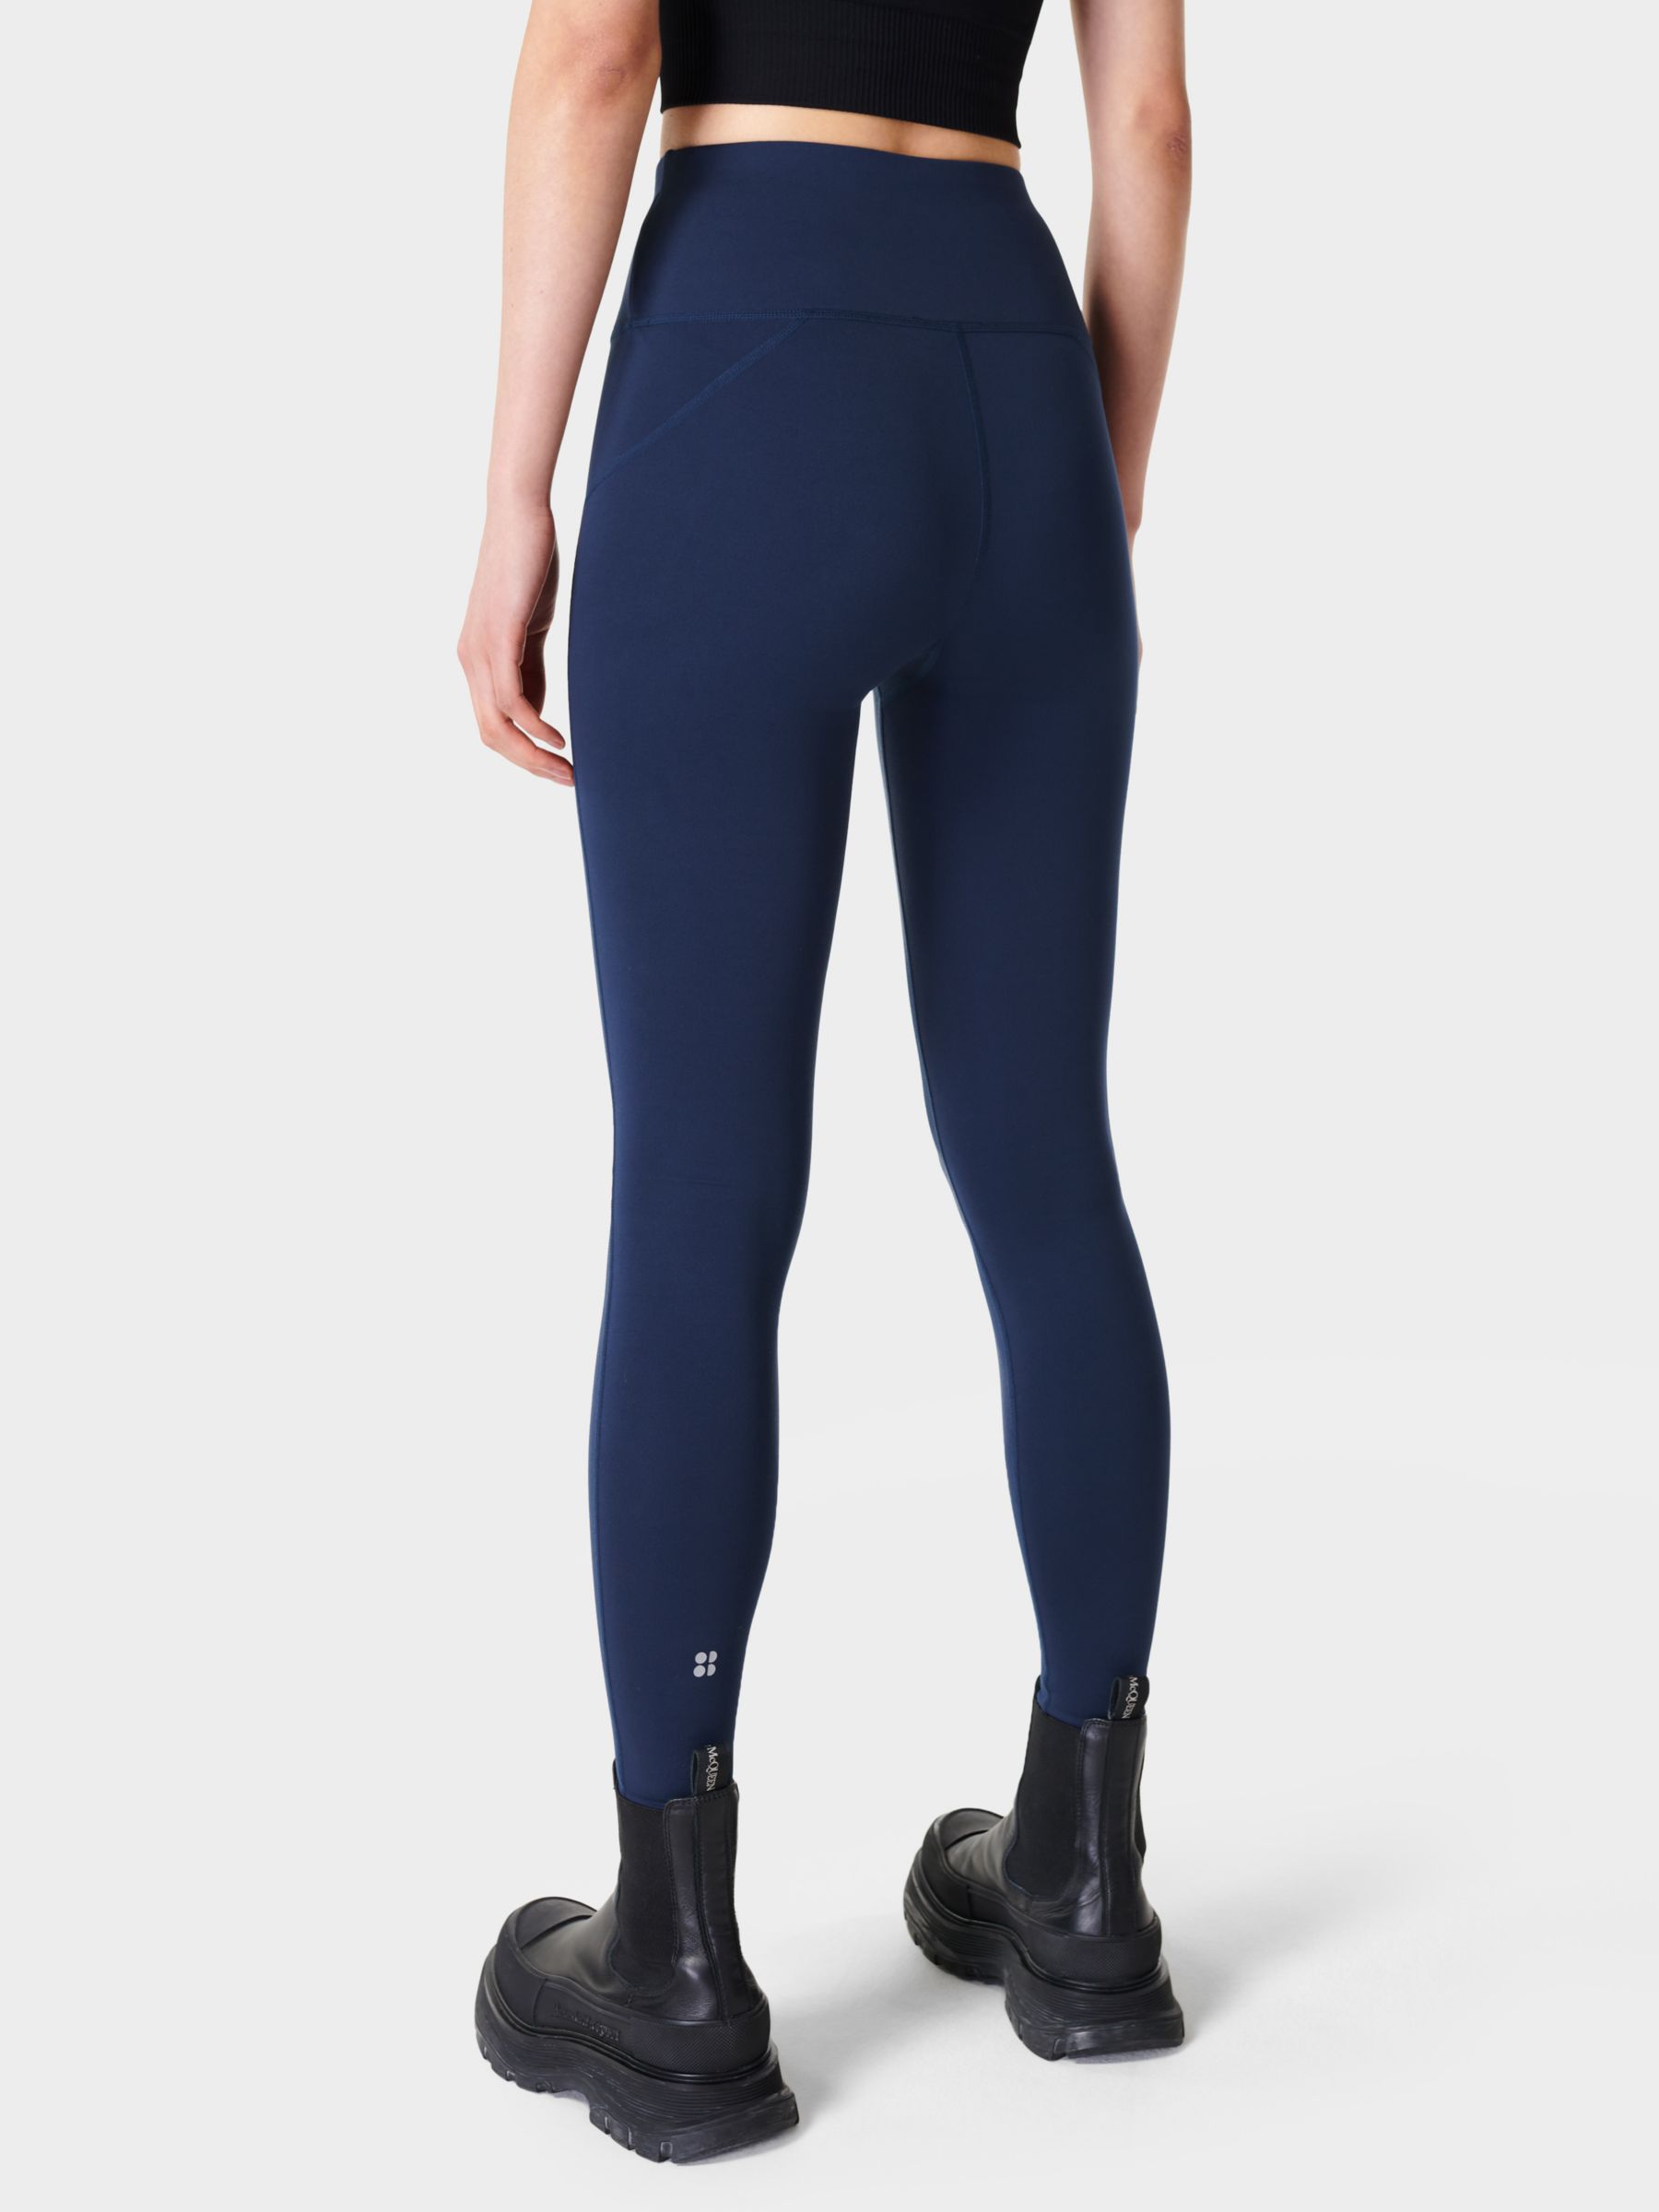 High Waist, Stretchy and Recovery Sports Leggings Navy Blue Shop Now